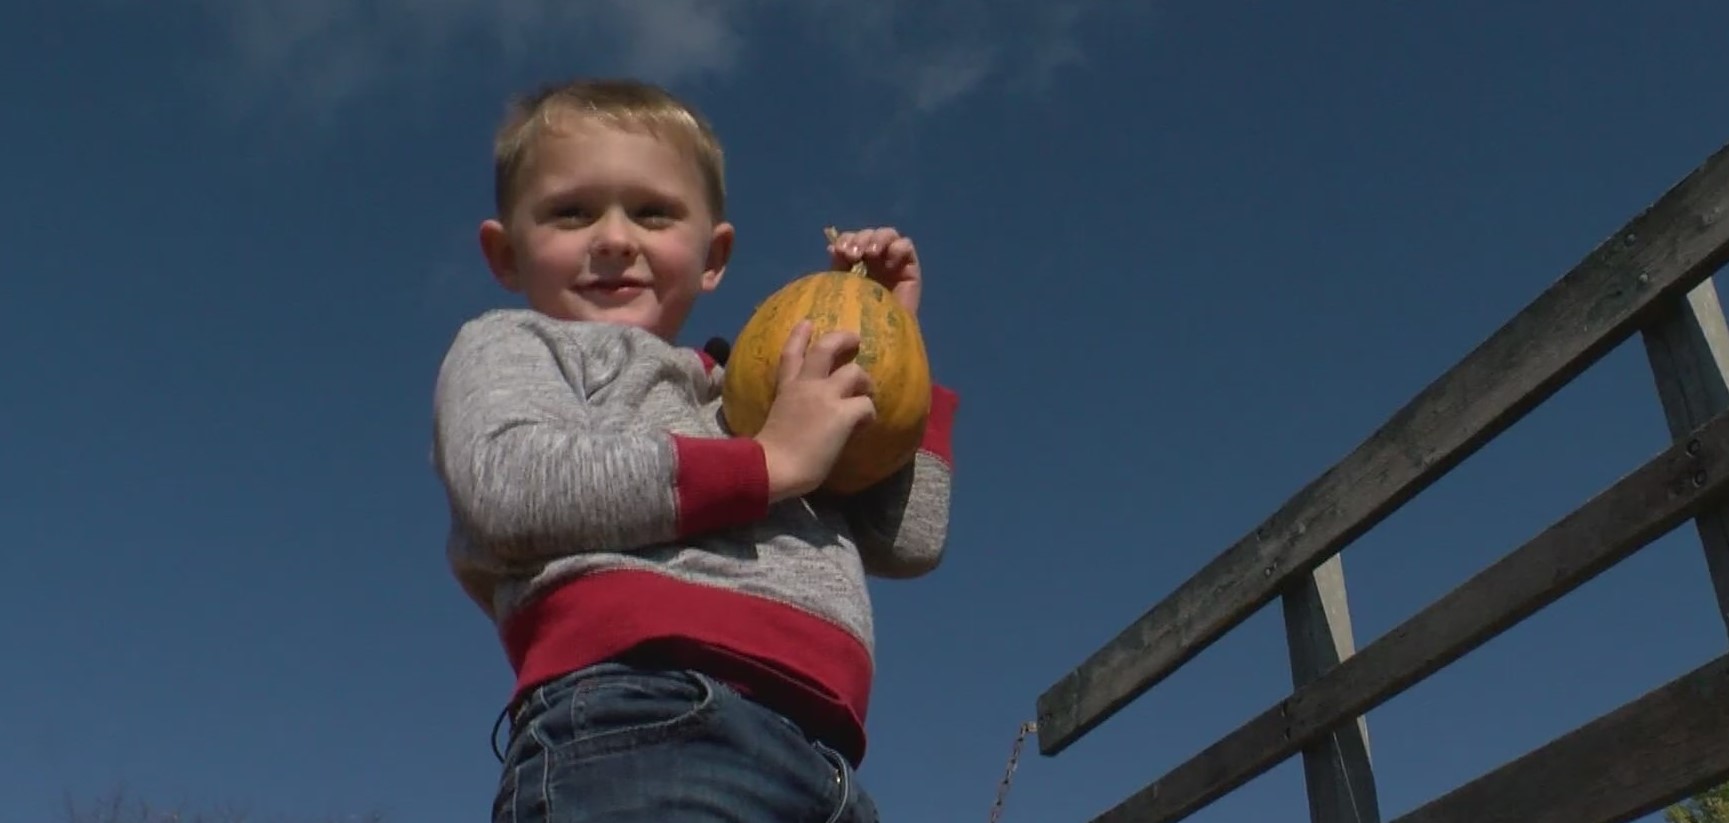 ‘I’m Going To Donate It All’: 5-Year-Old Sells His Pumpkins To Raise Money For Others